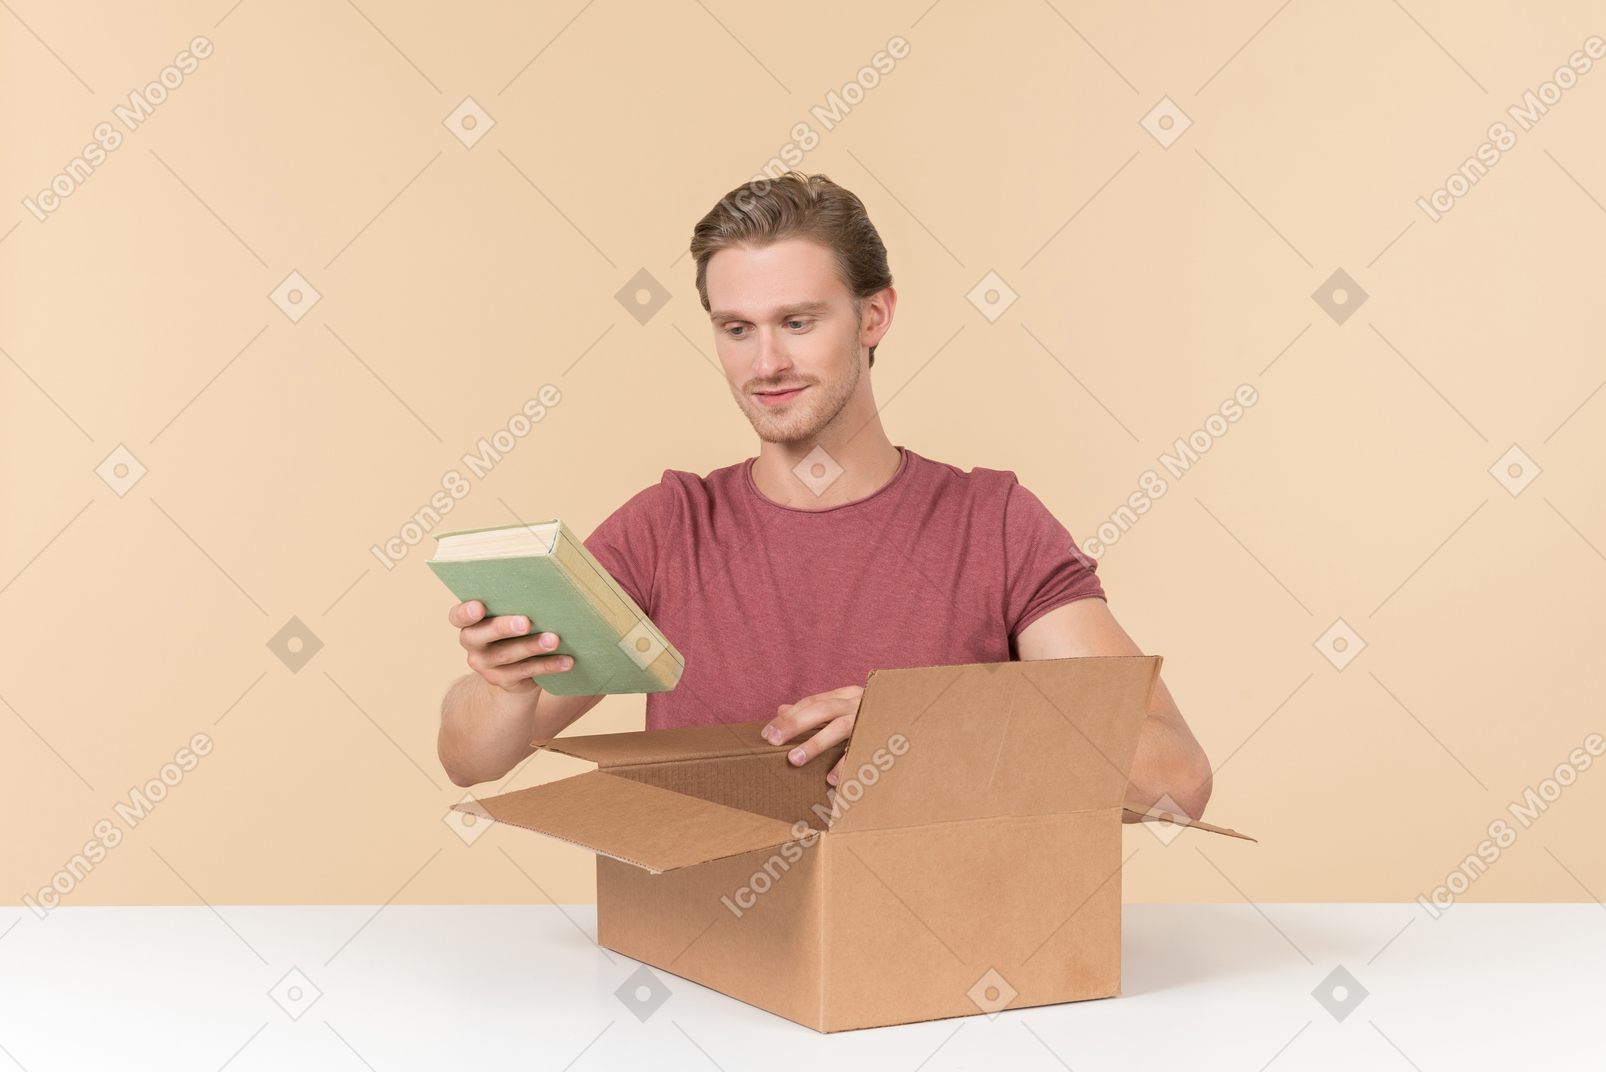 Checking up if i ordered the correct books